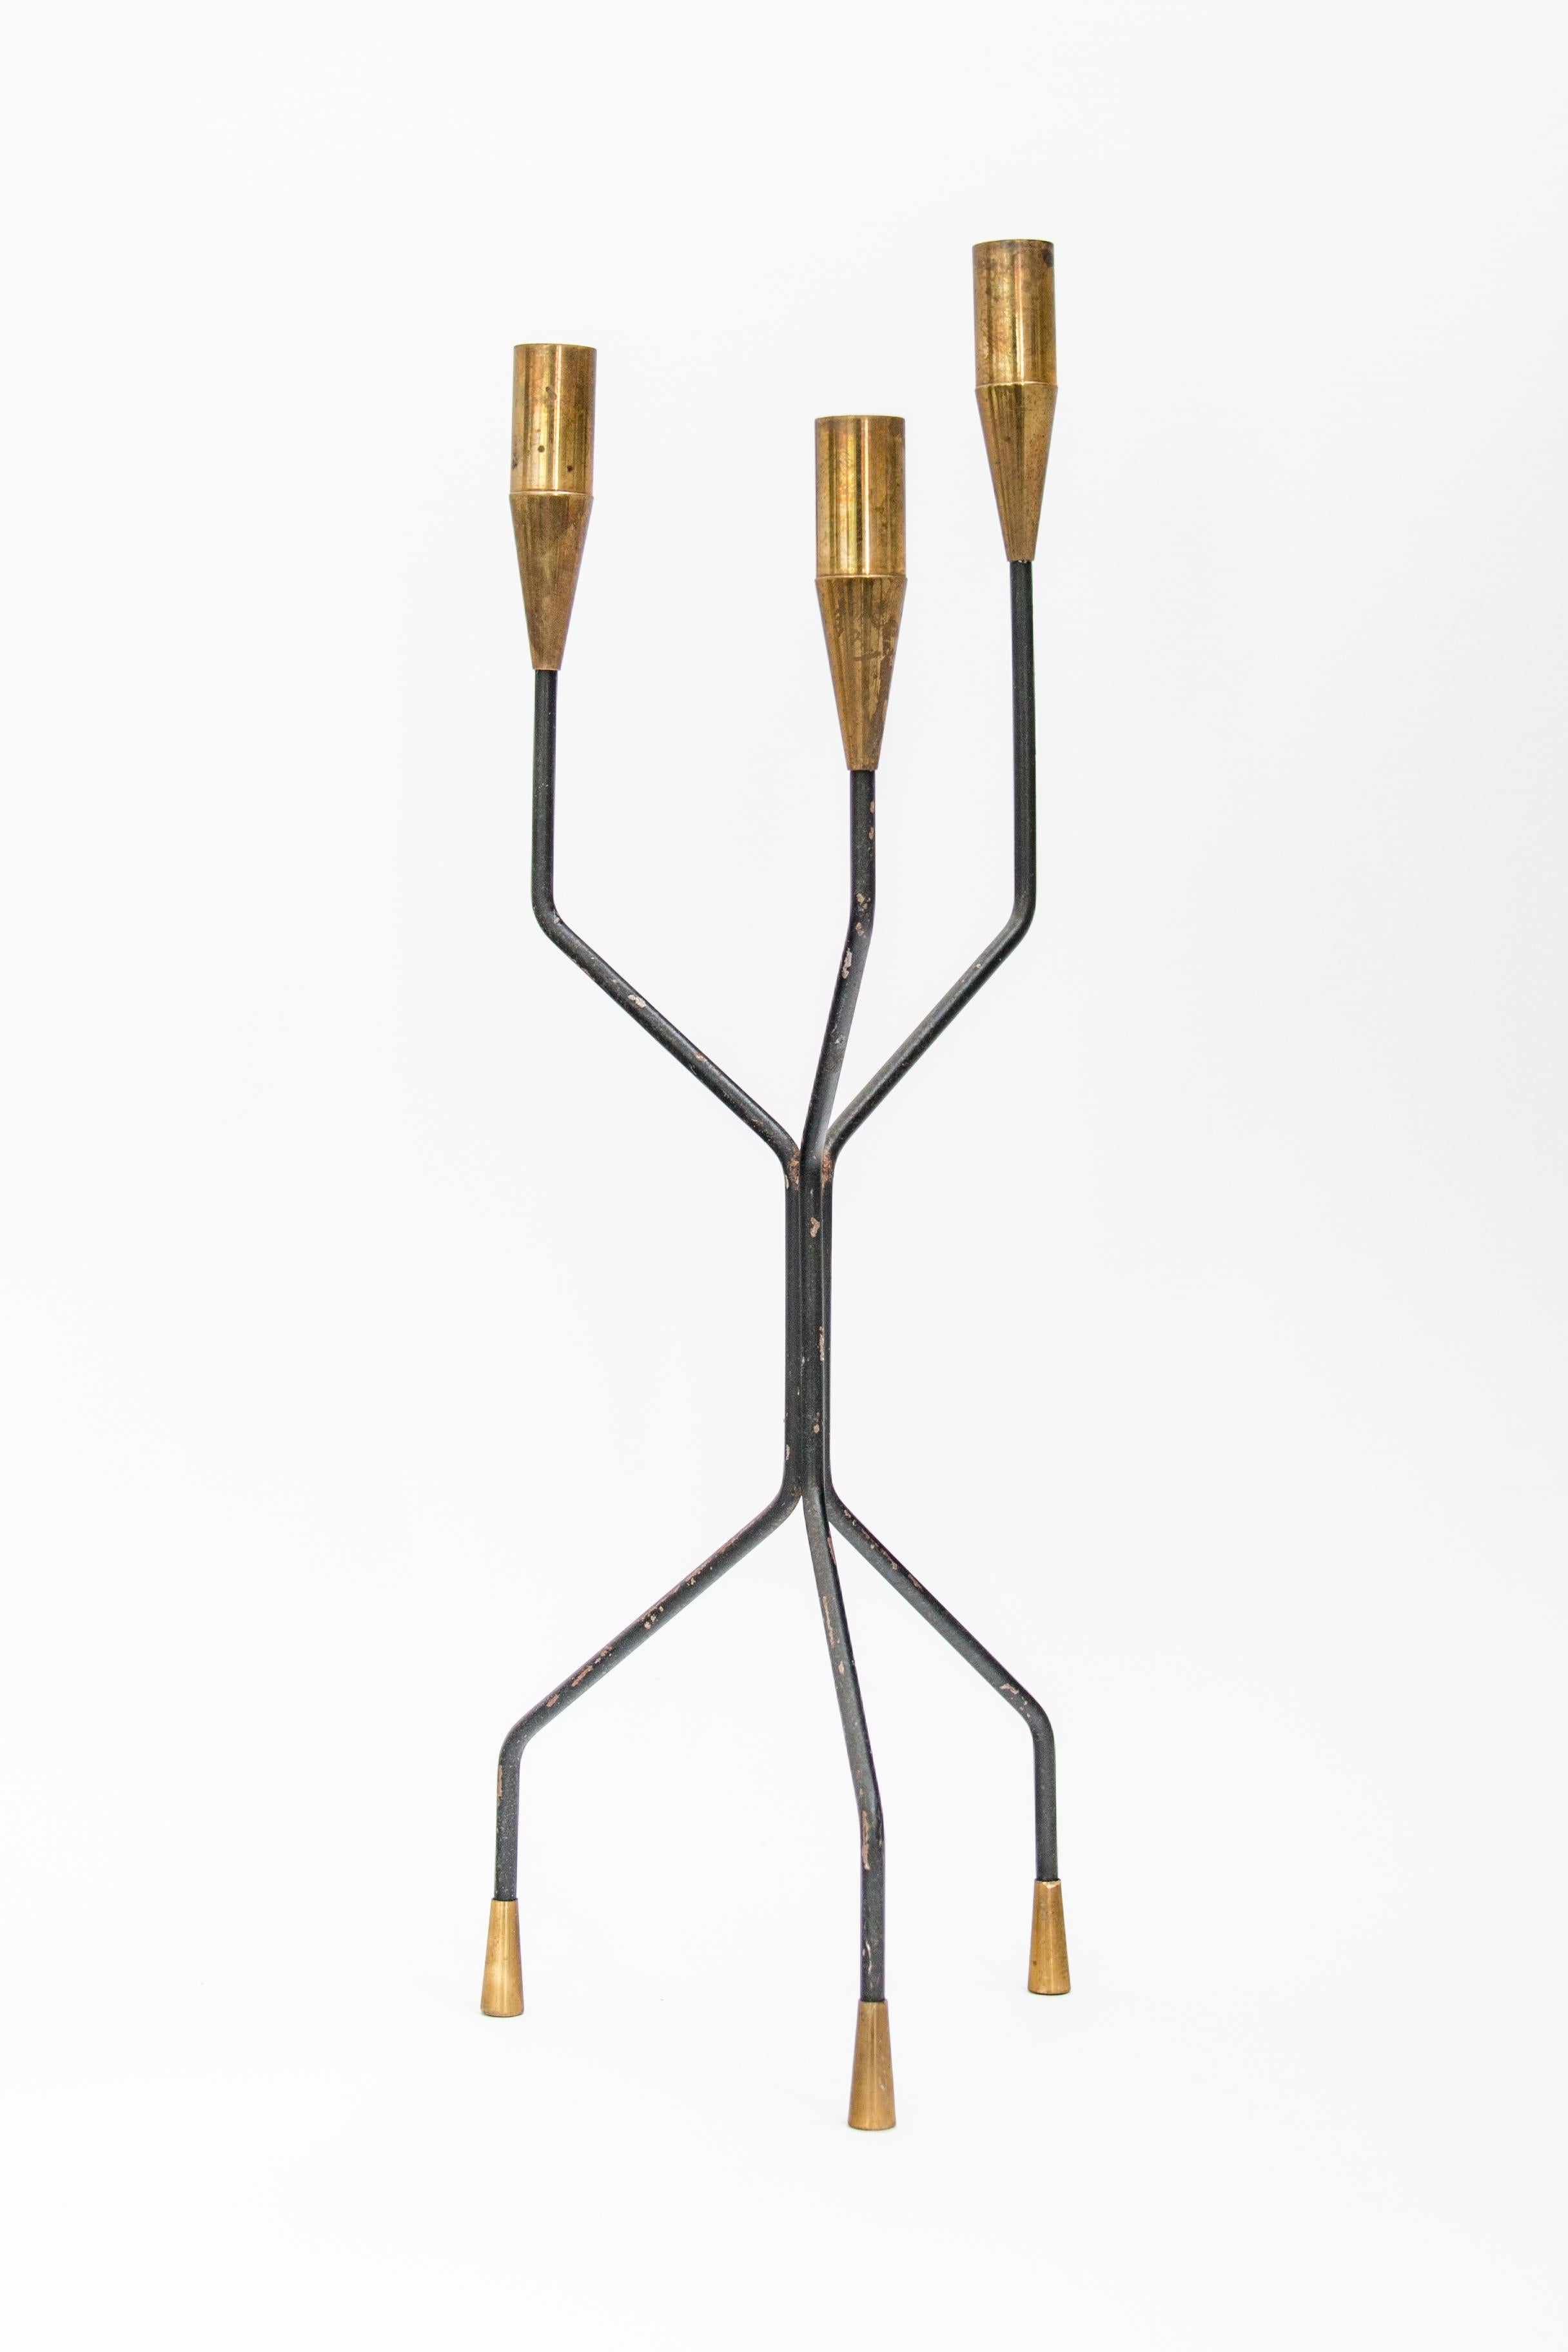 candle holder by Gunnar Ander for Ystad Metall
black wire and brass details